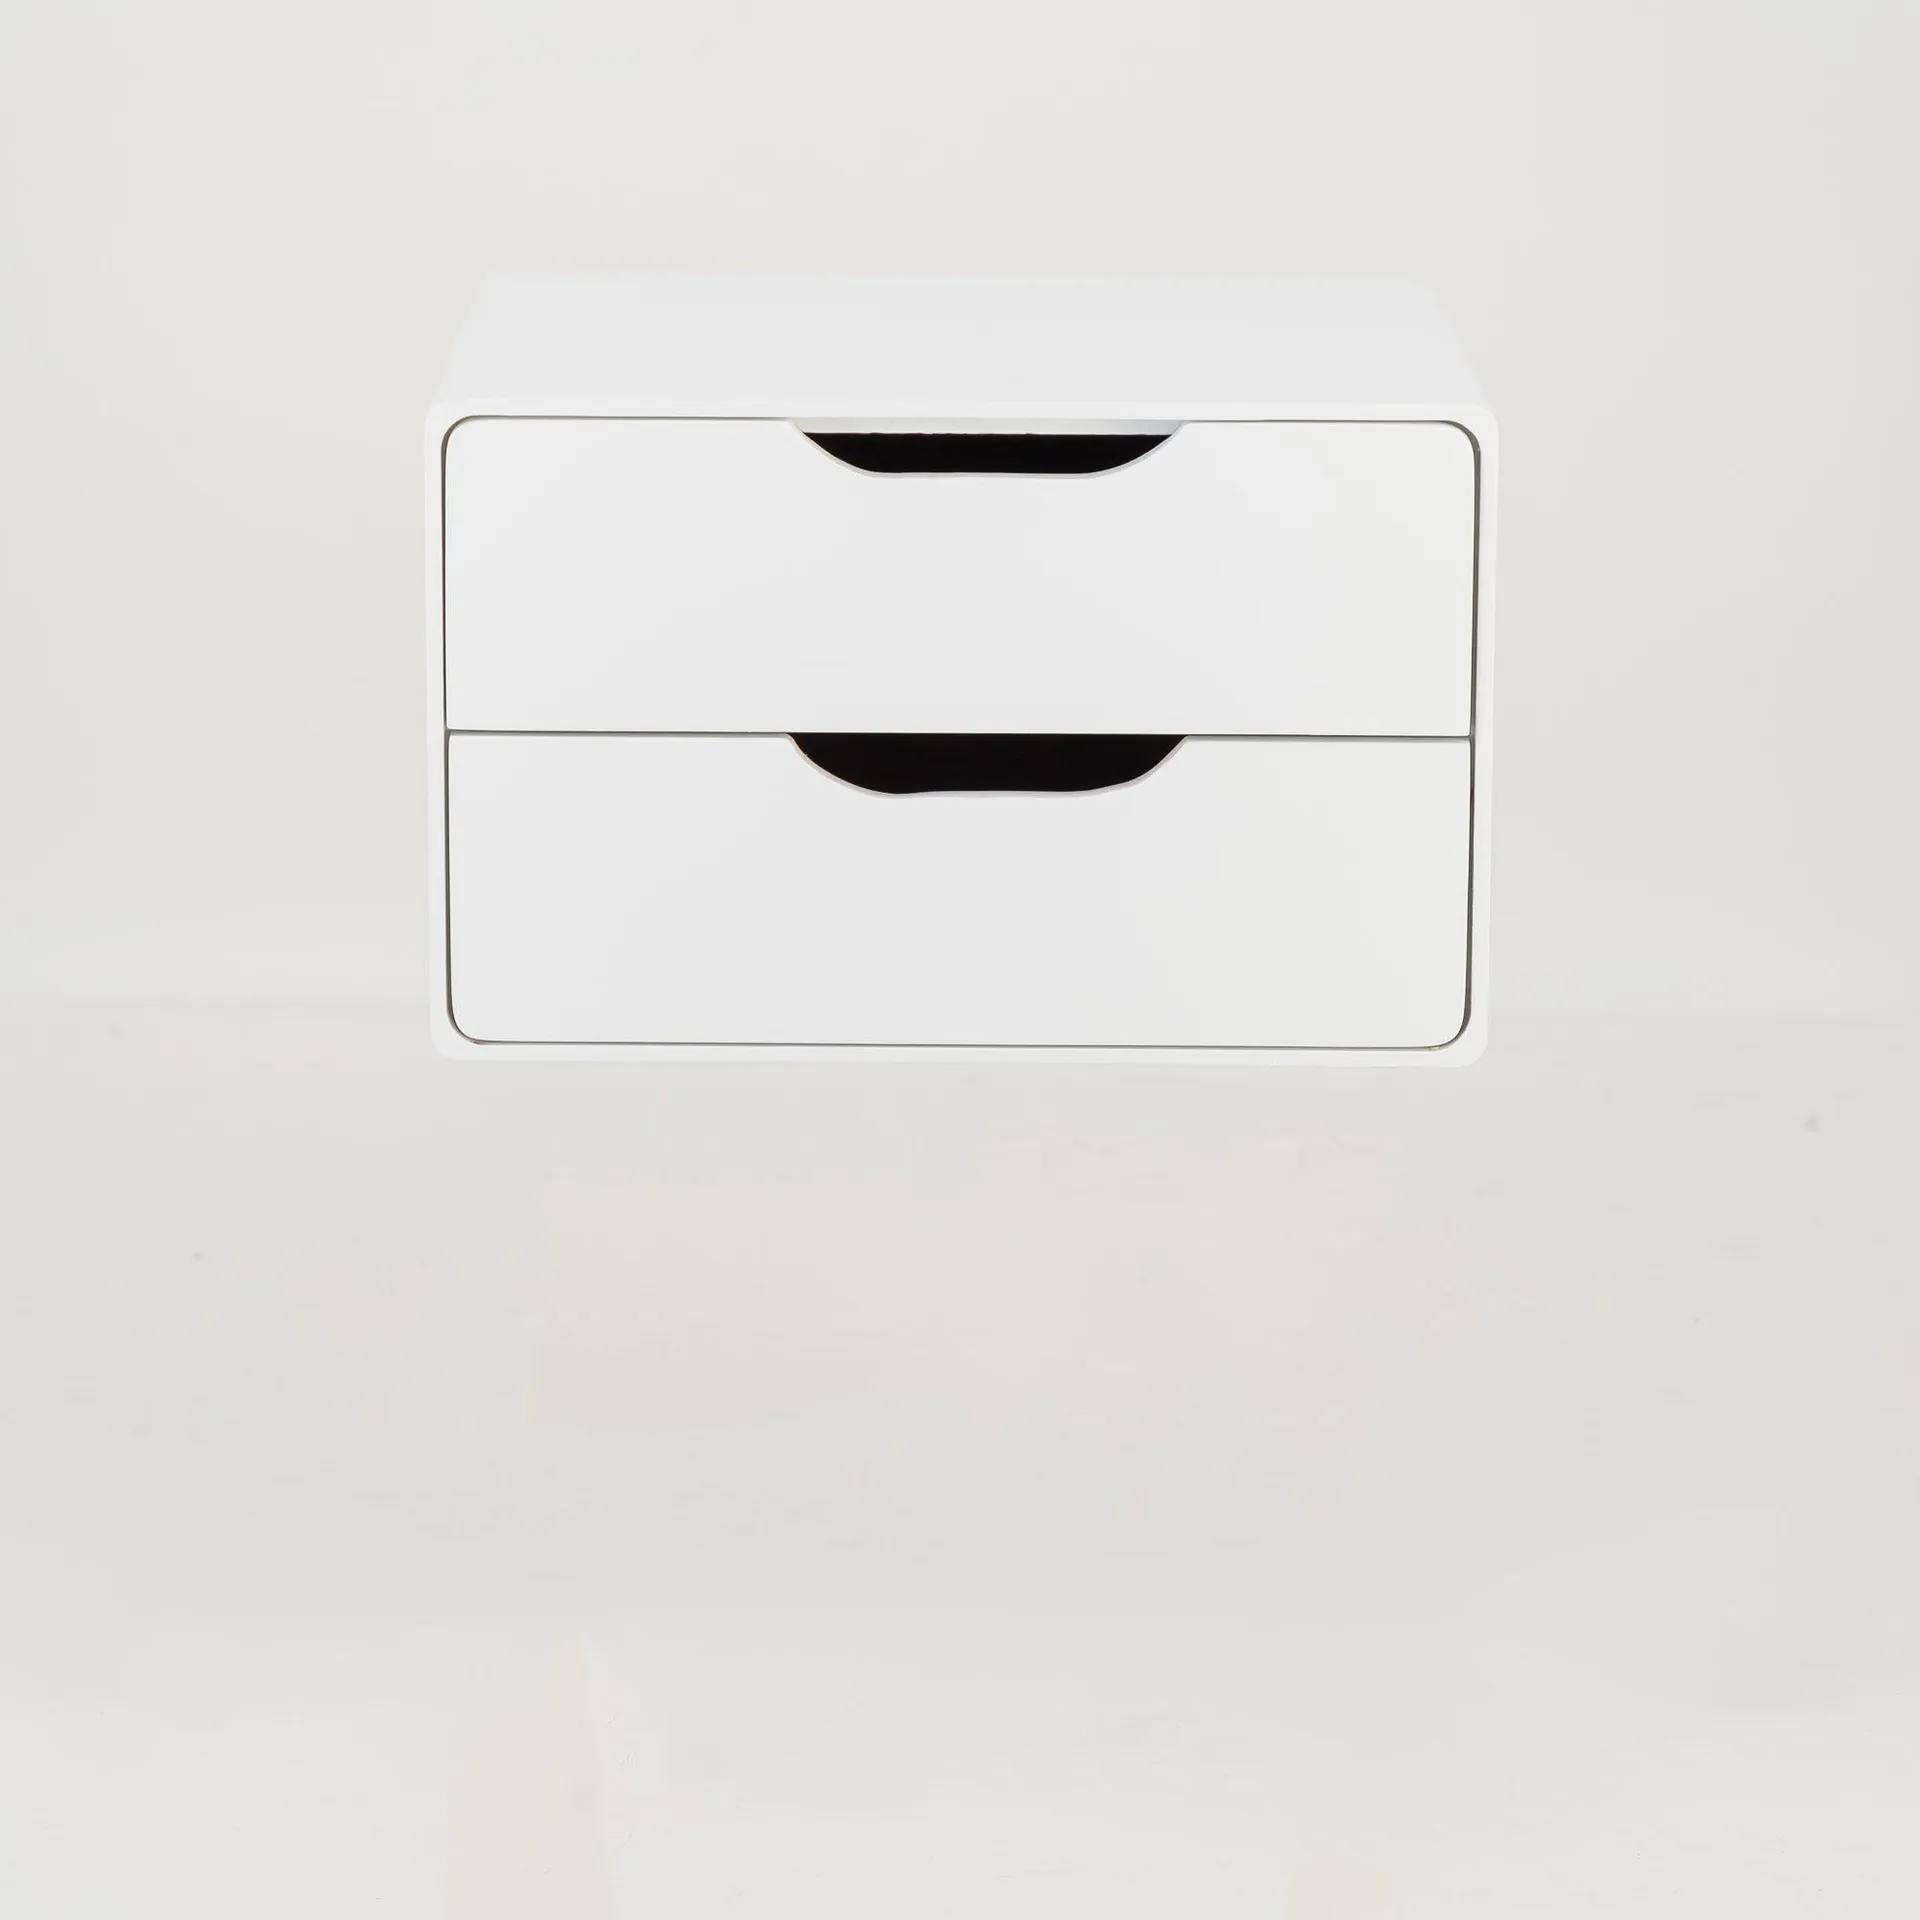 Khaya Two Drawer Floating Side Table with Cut Out Handles - White